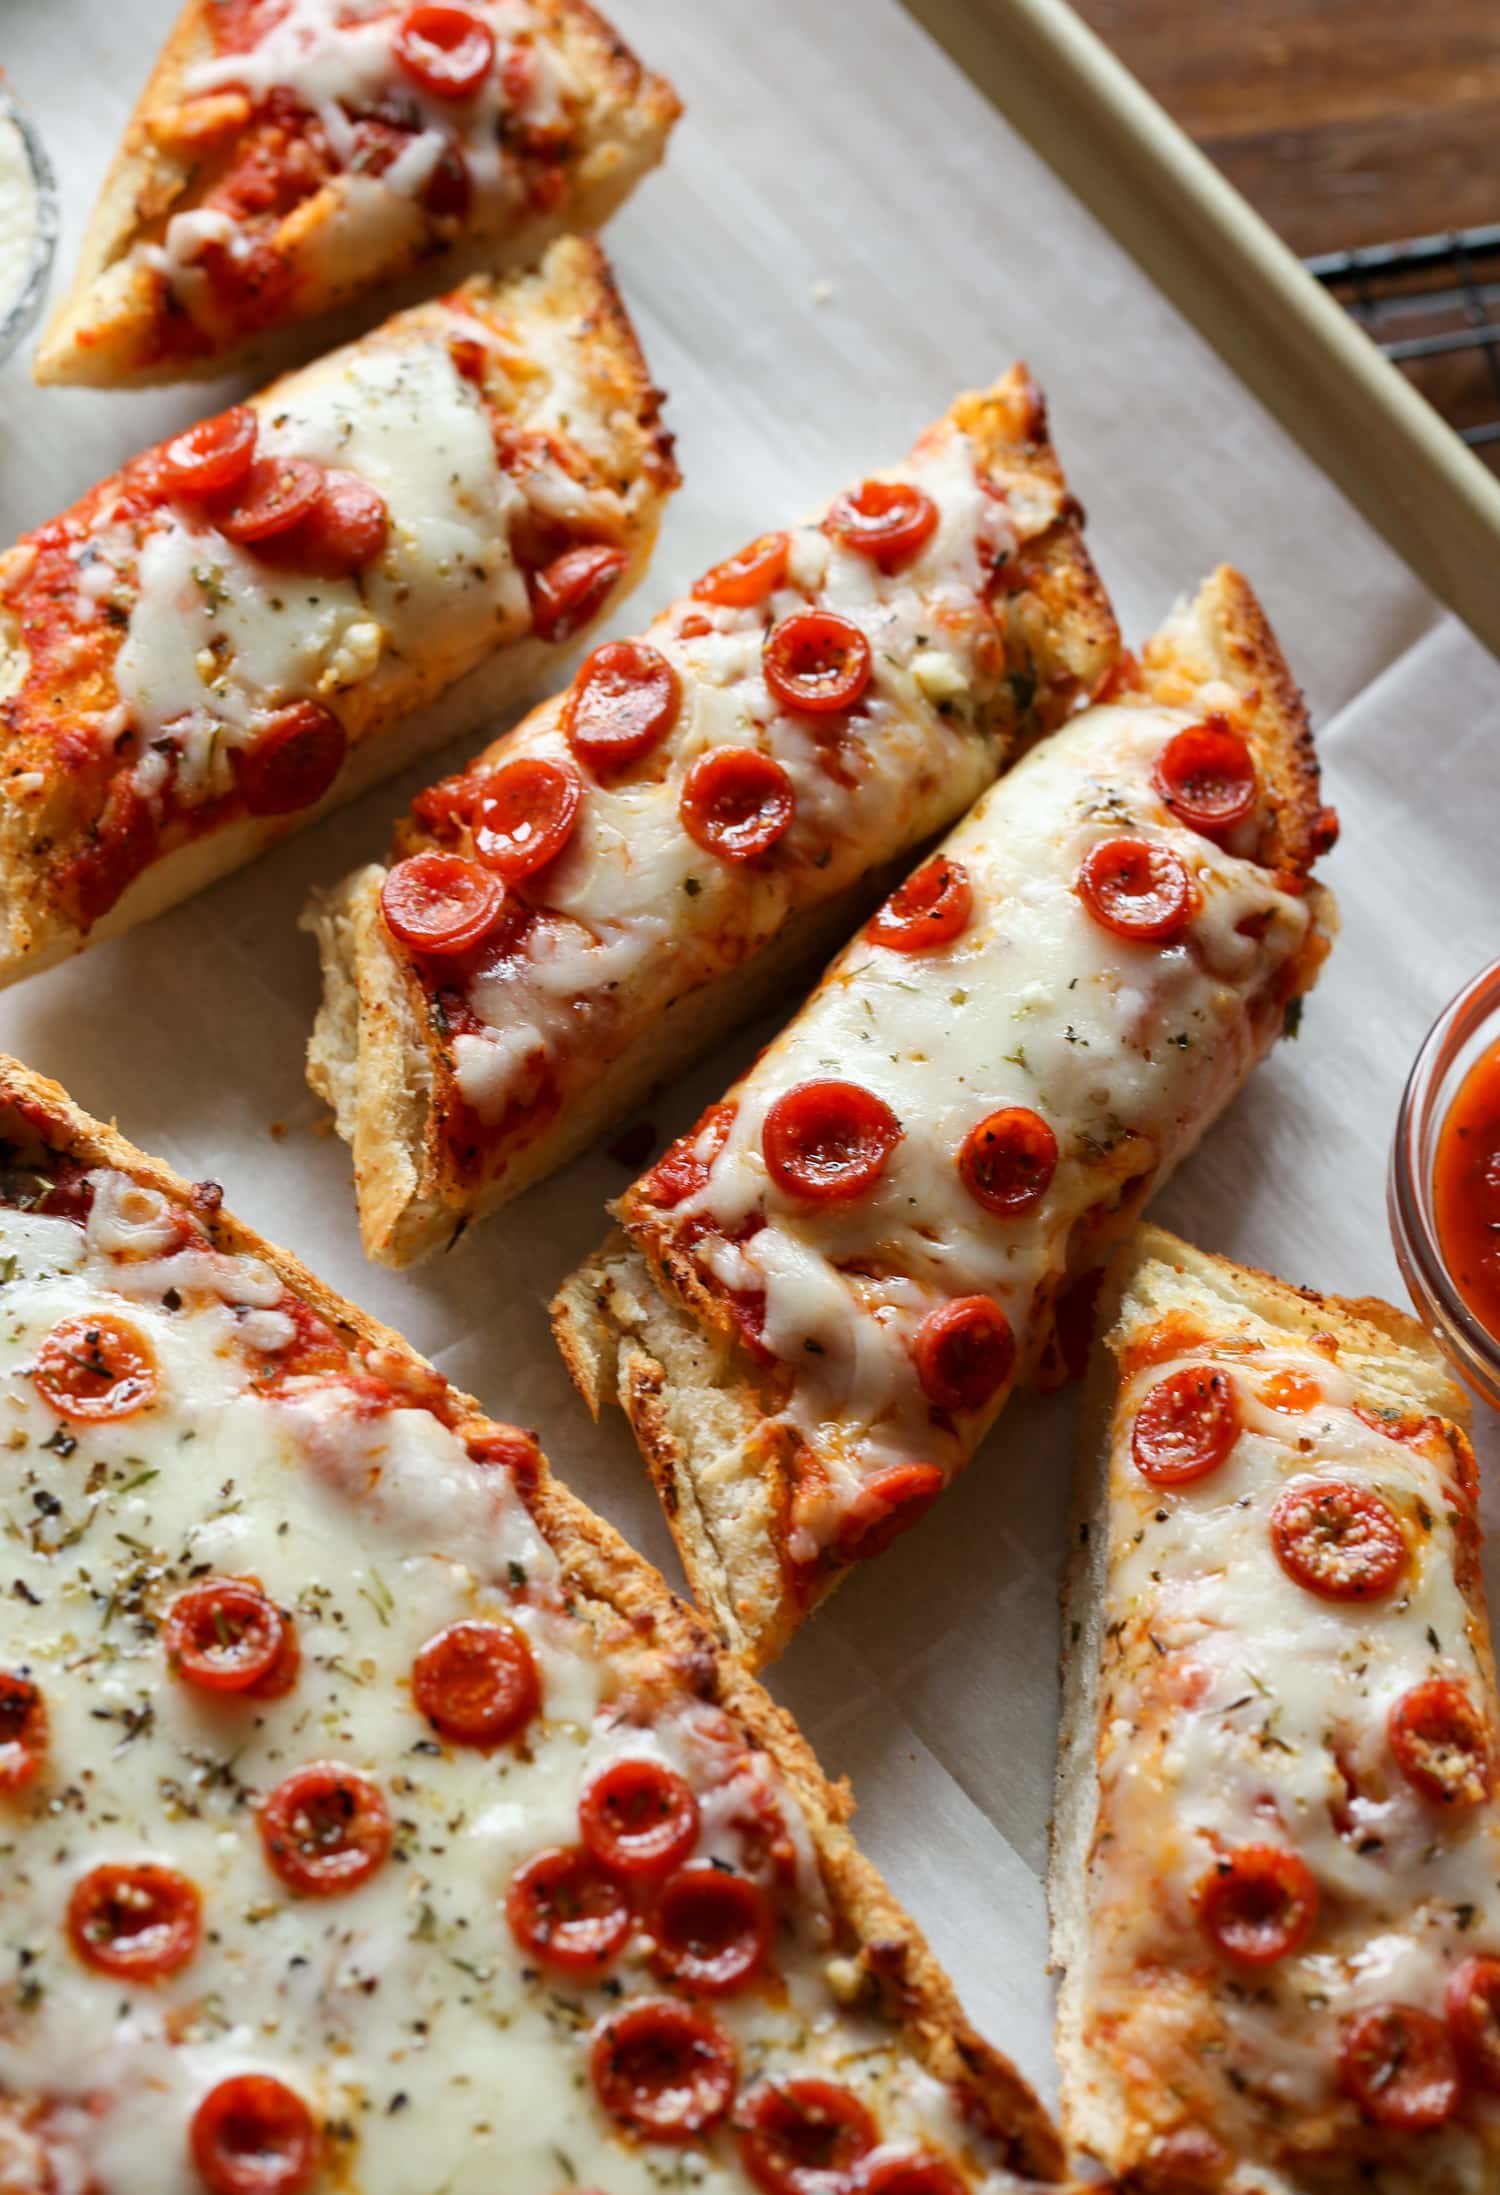 French bread pizza cut into individual slices on a platter.